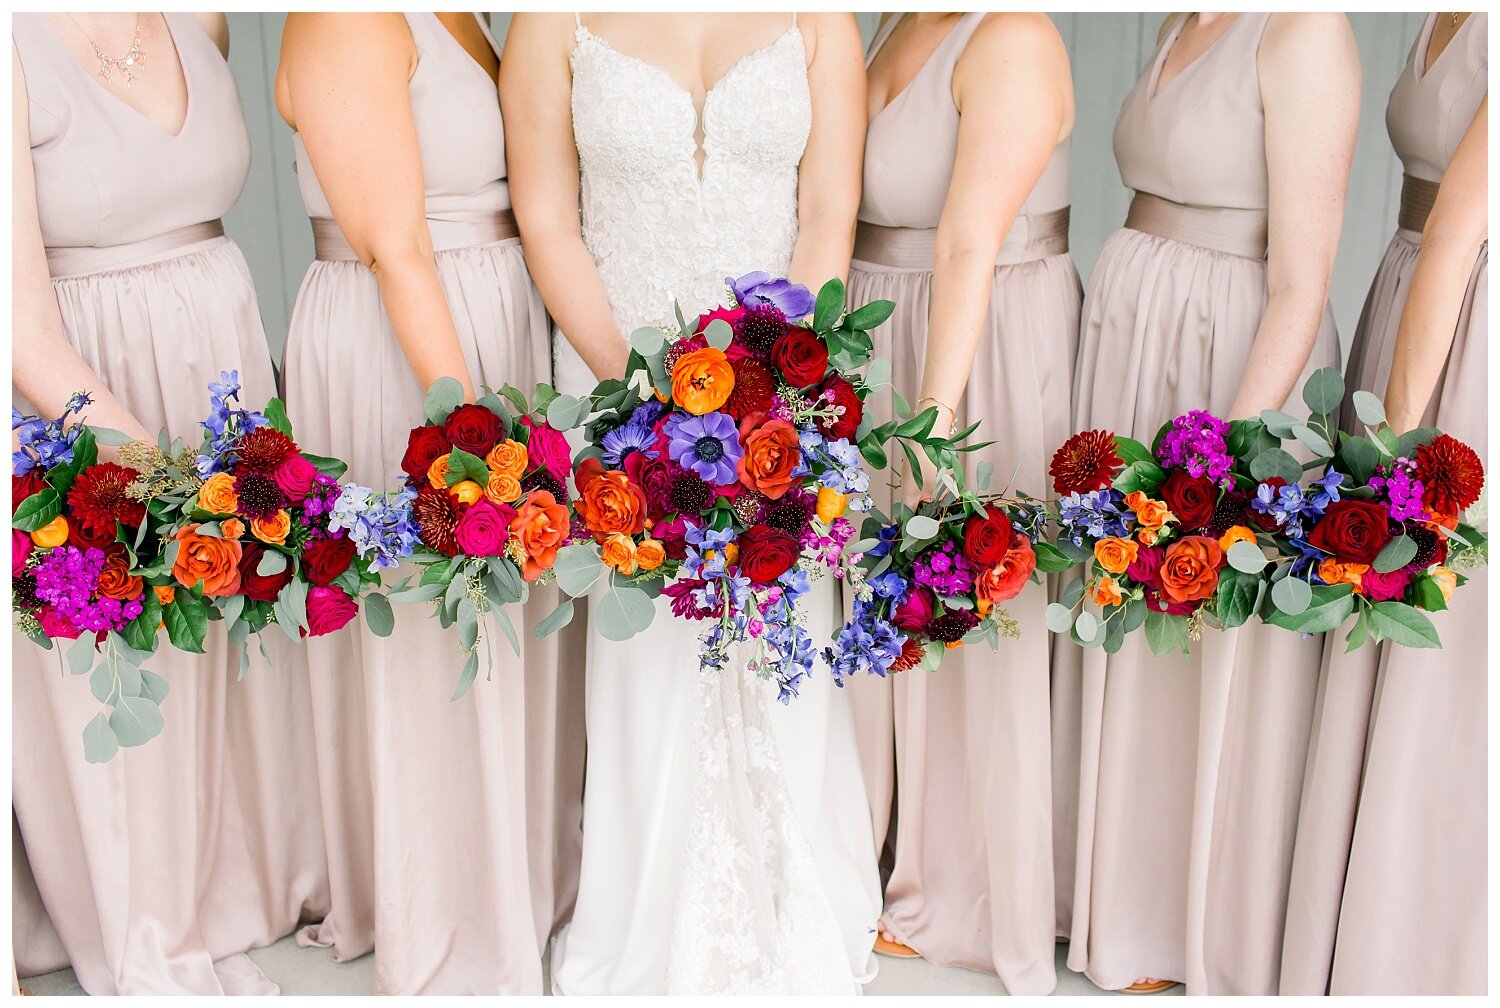 Heart and Soul Floral brightly colored wedding bouquets